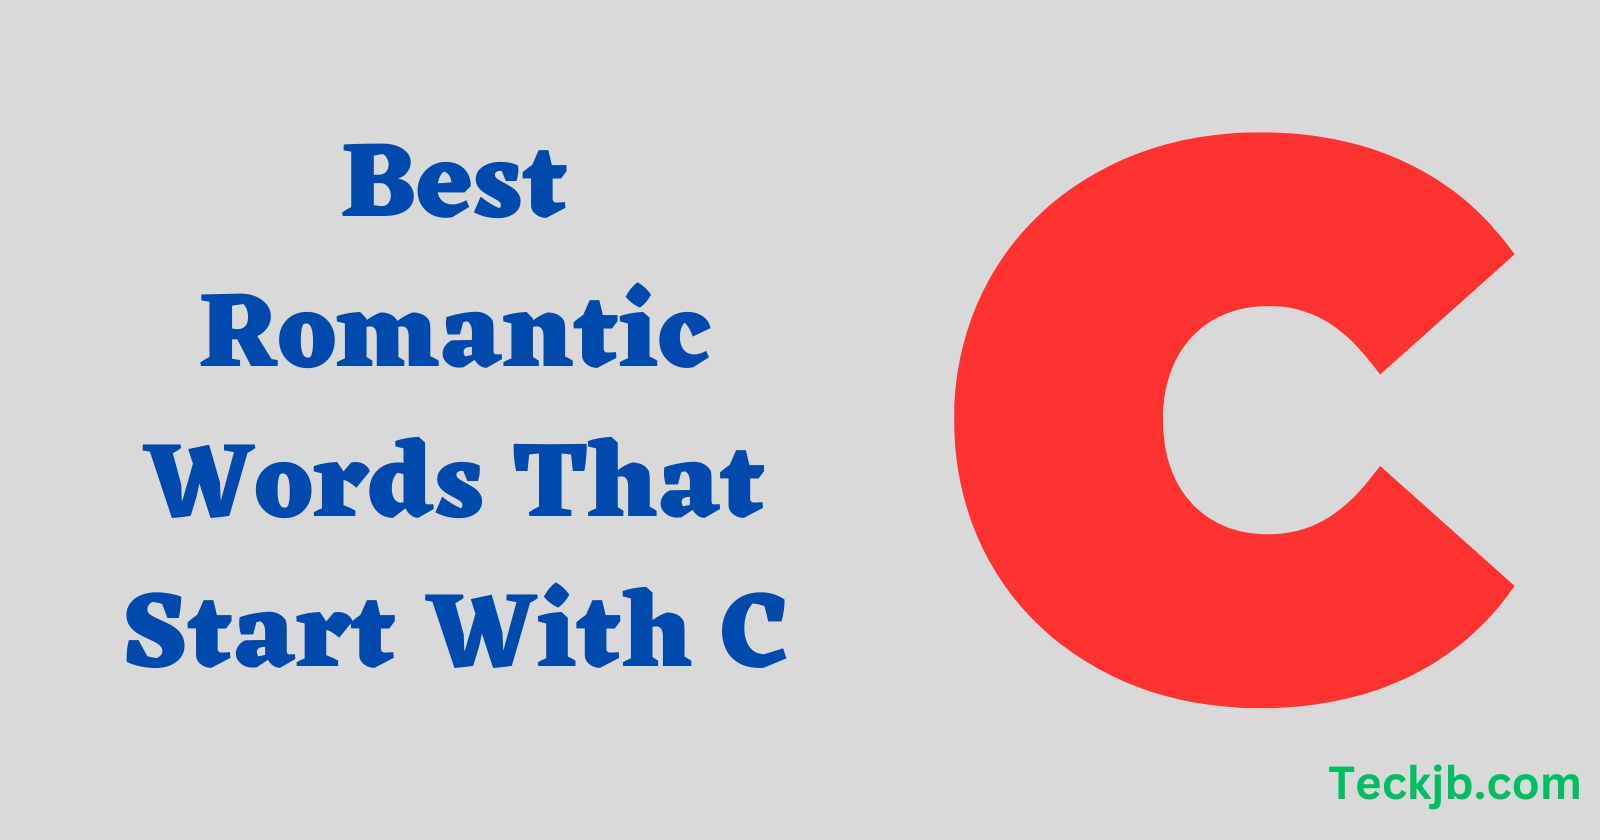 Romantic Words That Start With C